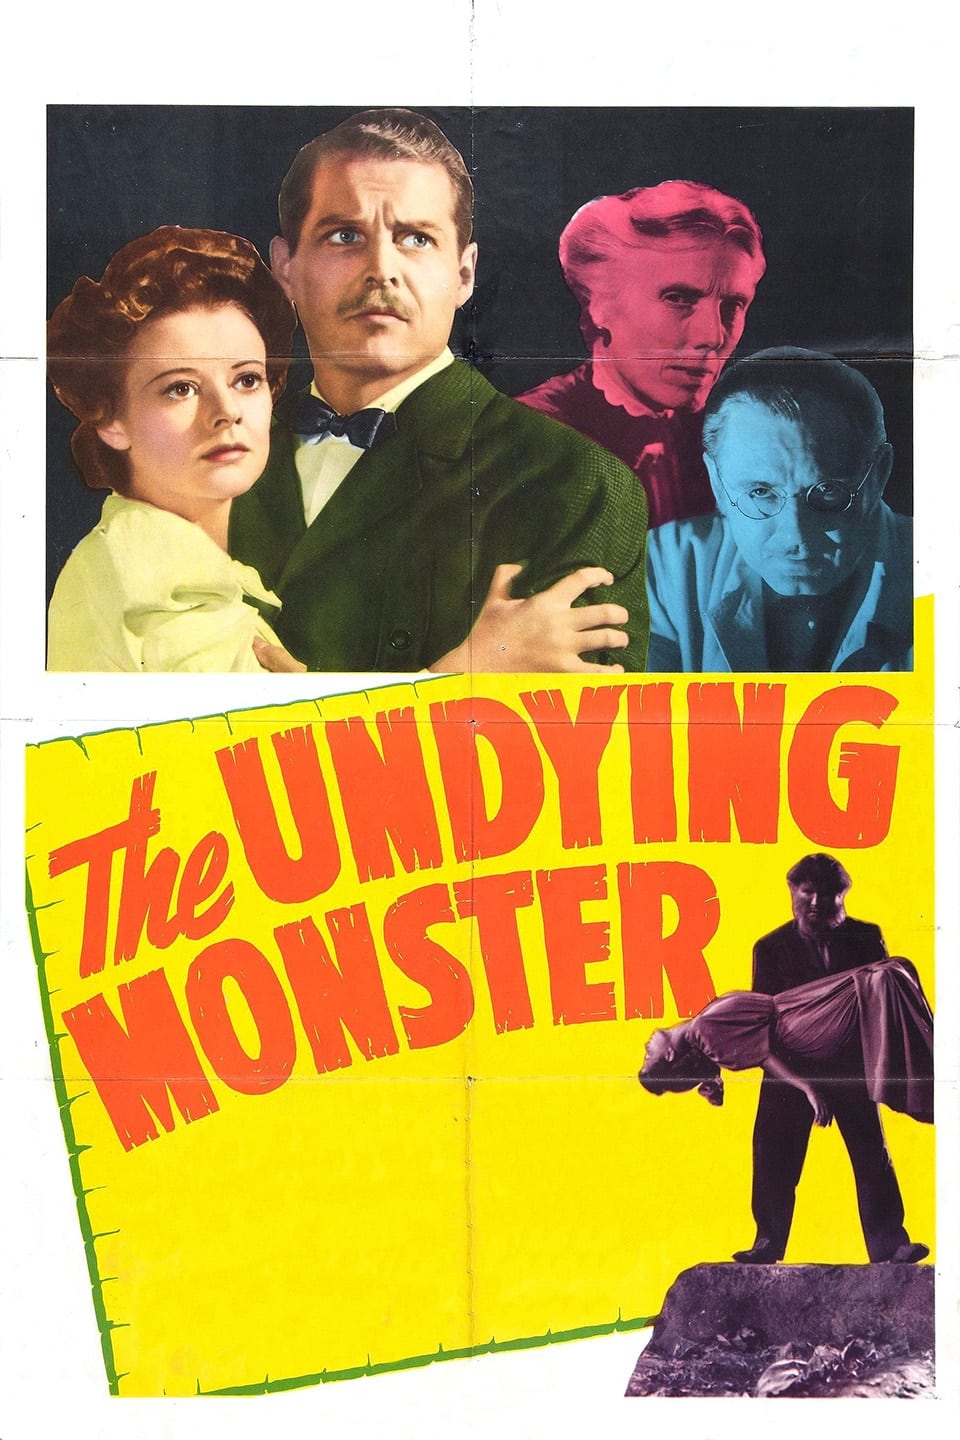 The Undying Monster (1942)